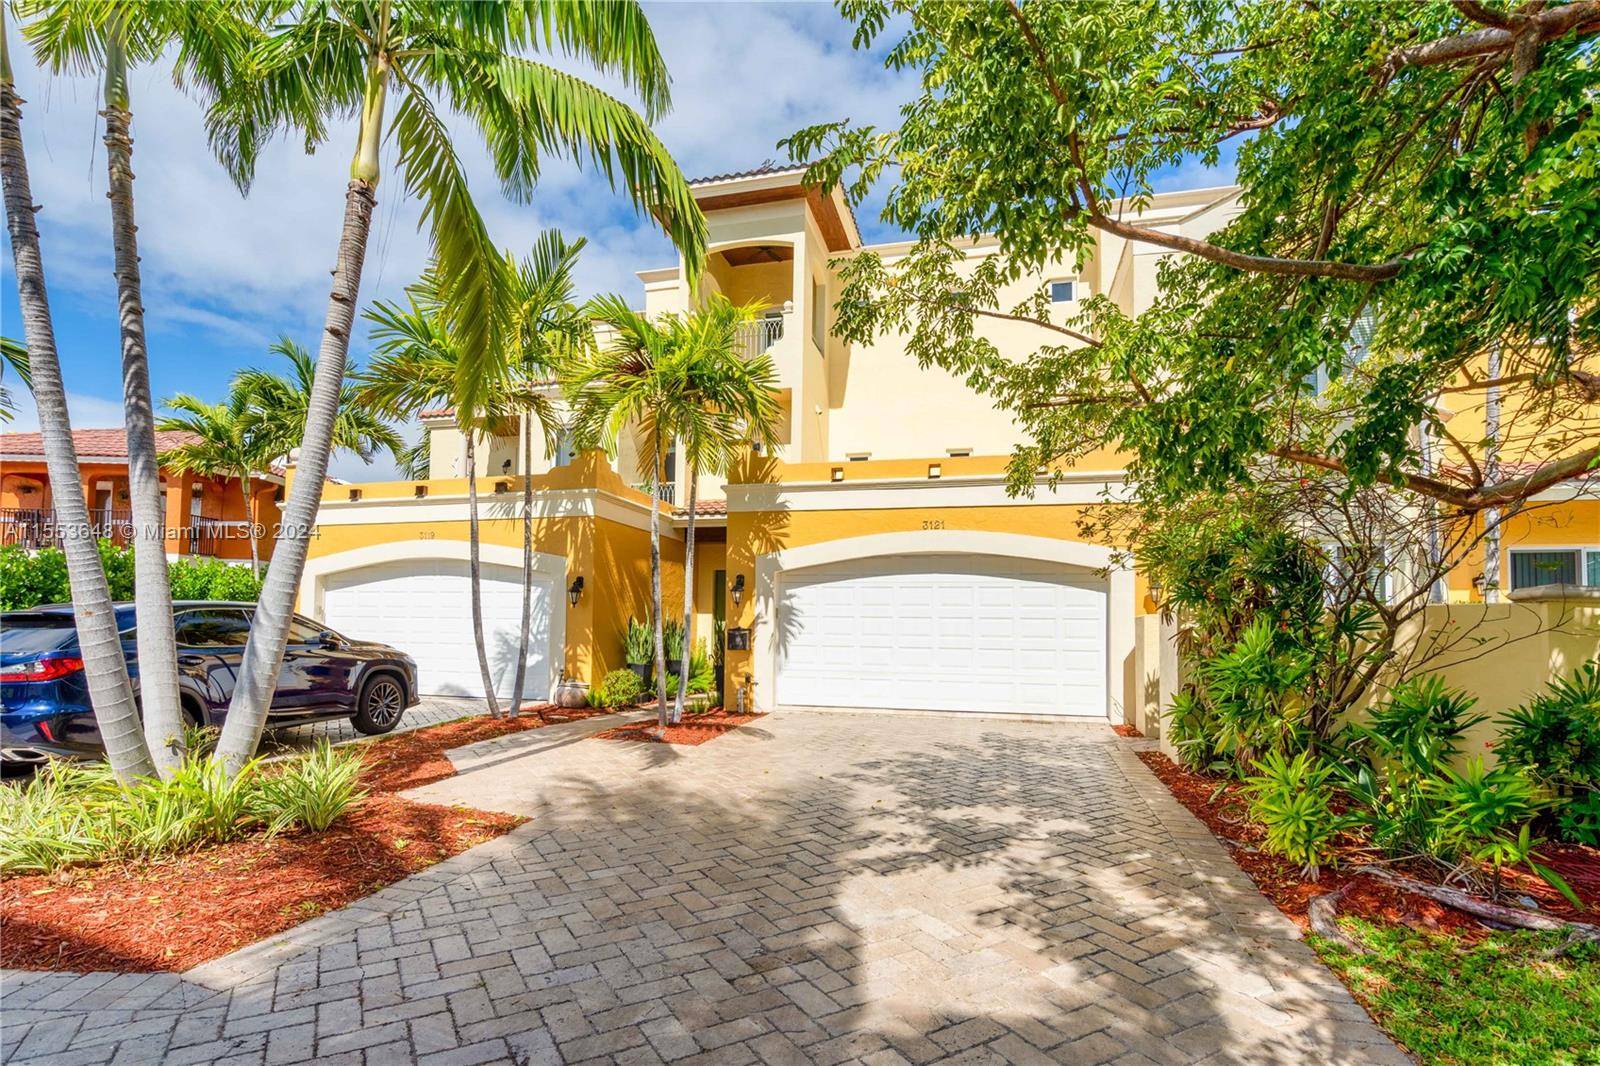 One of a kind townhome in prestigious Dolphin Isles in East Fort Lauderdale.